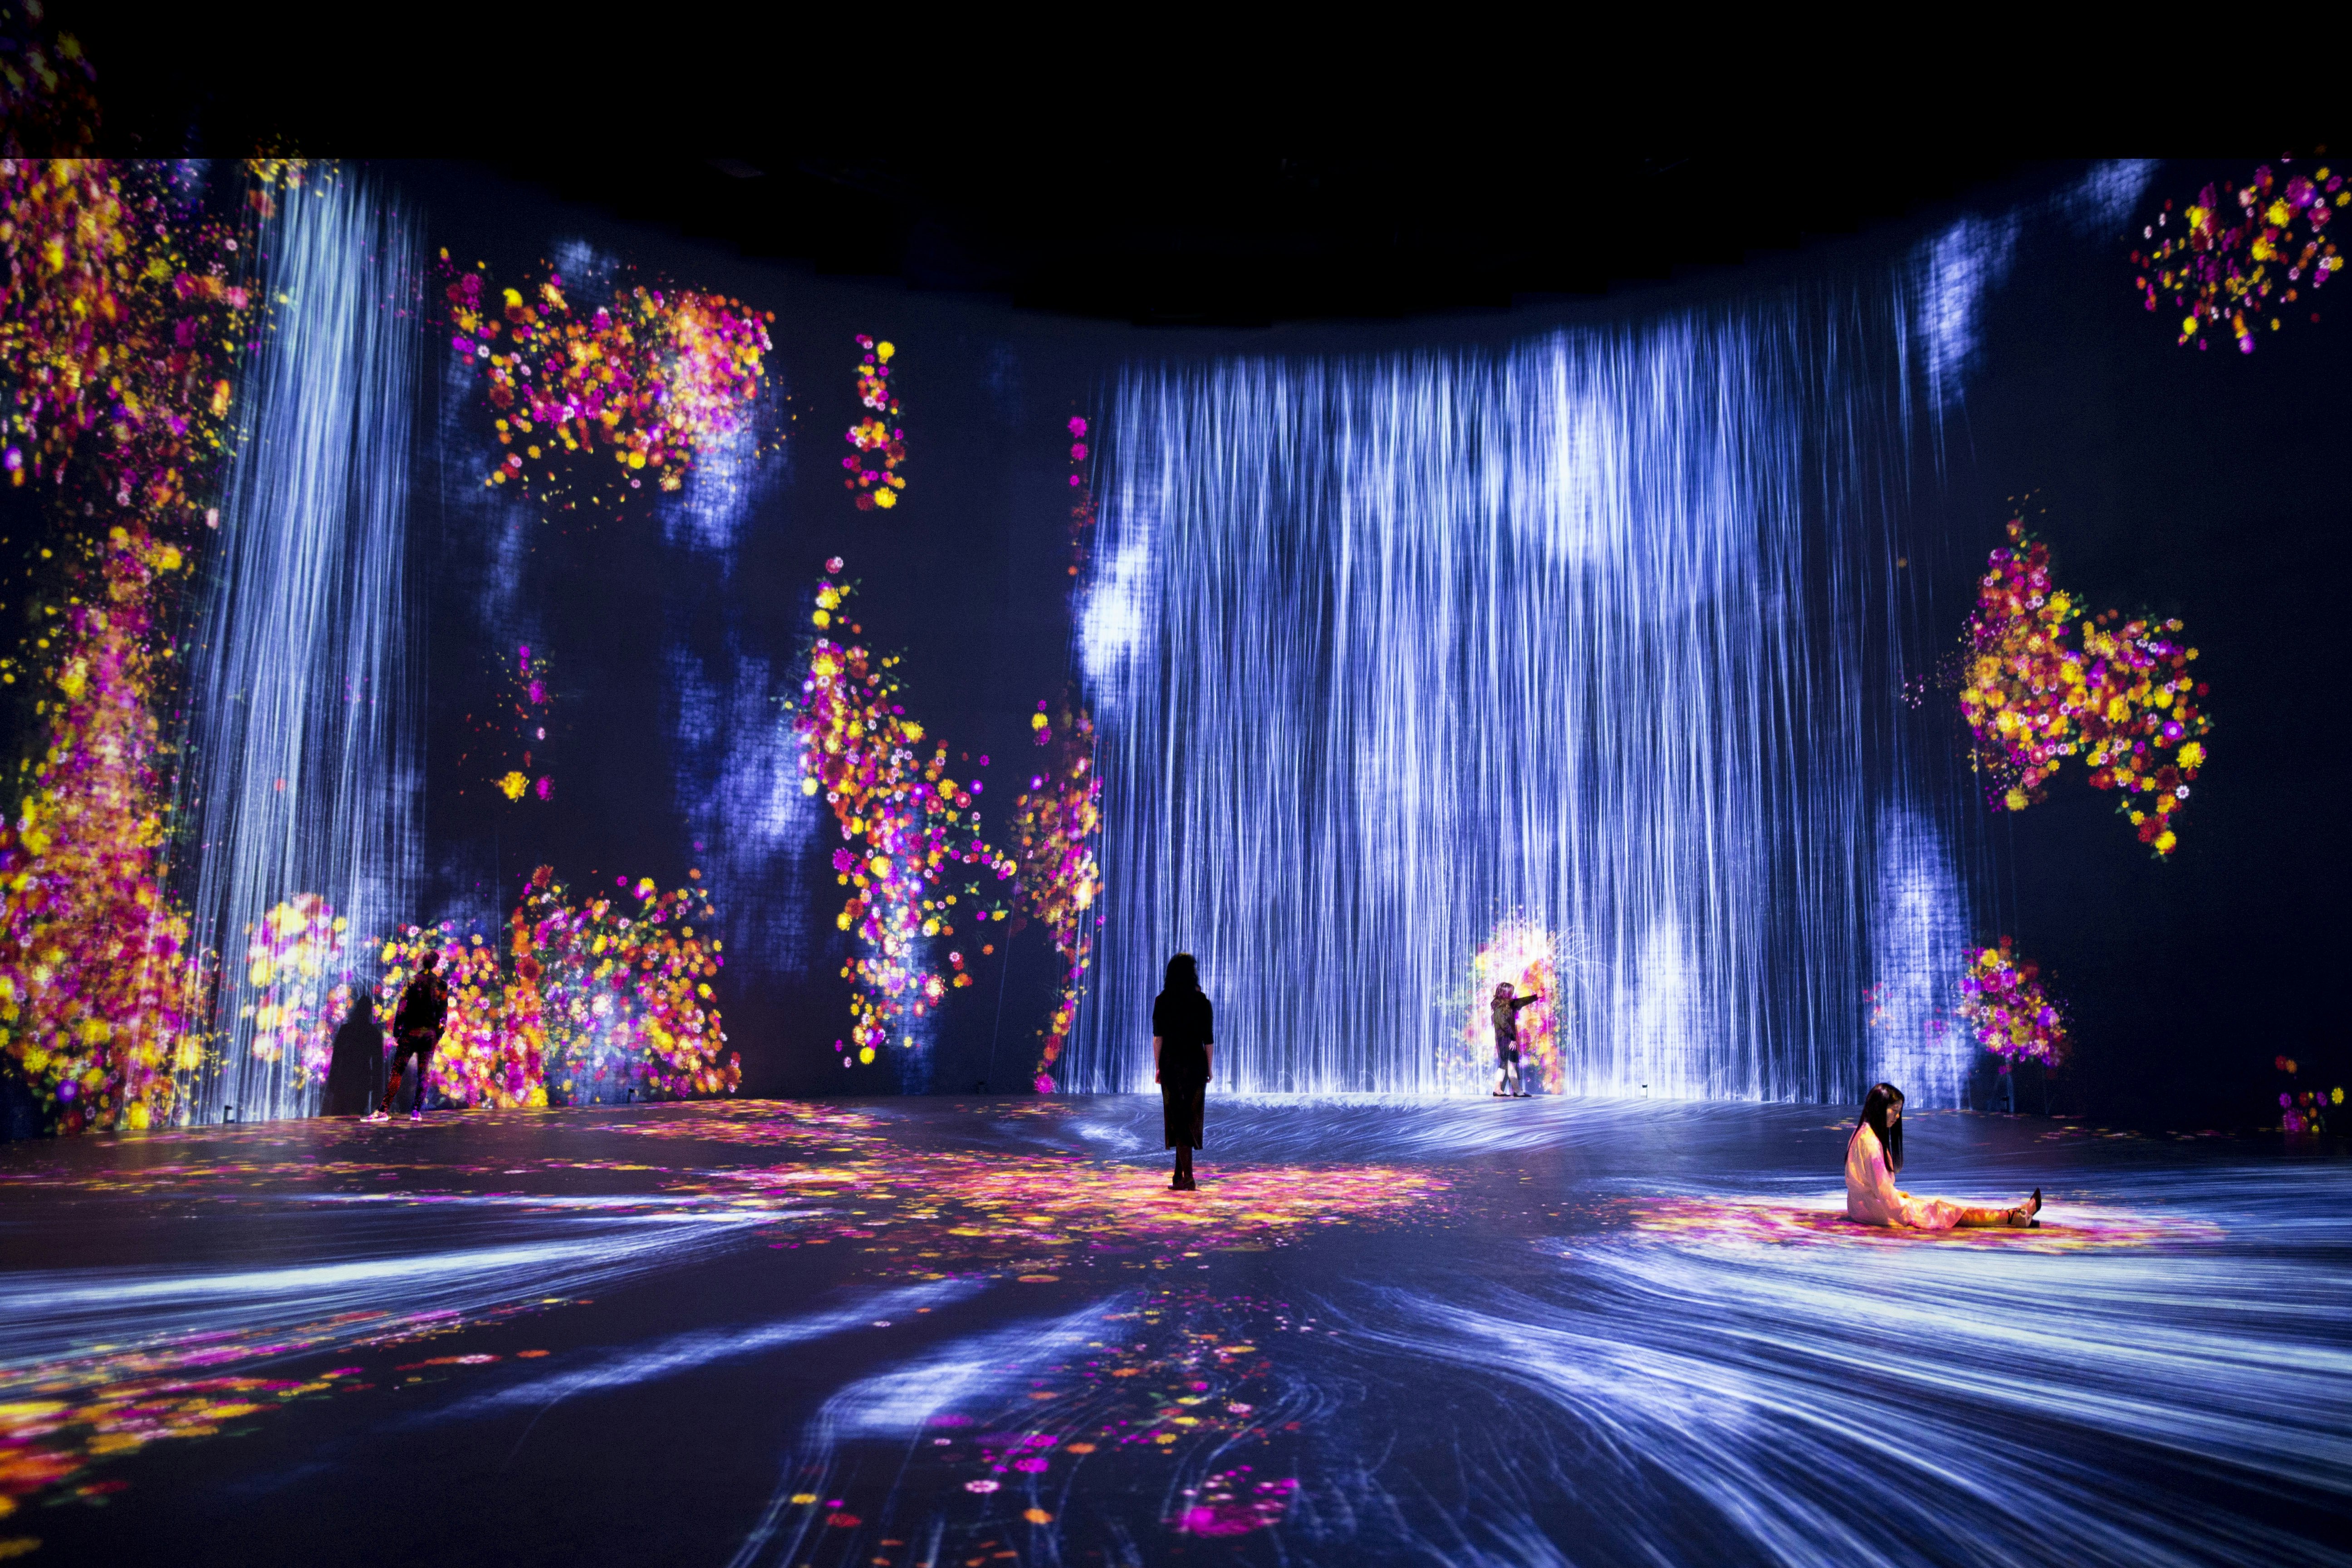 Universe of Water Particles AND Flowers and People_4x3_5MB.jpg